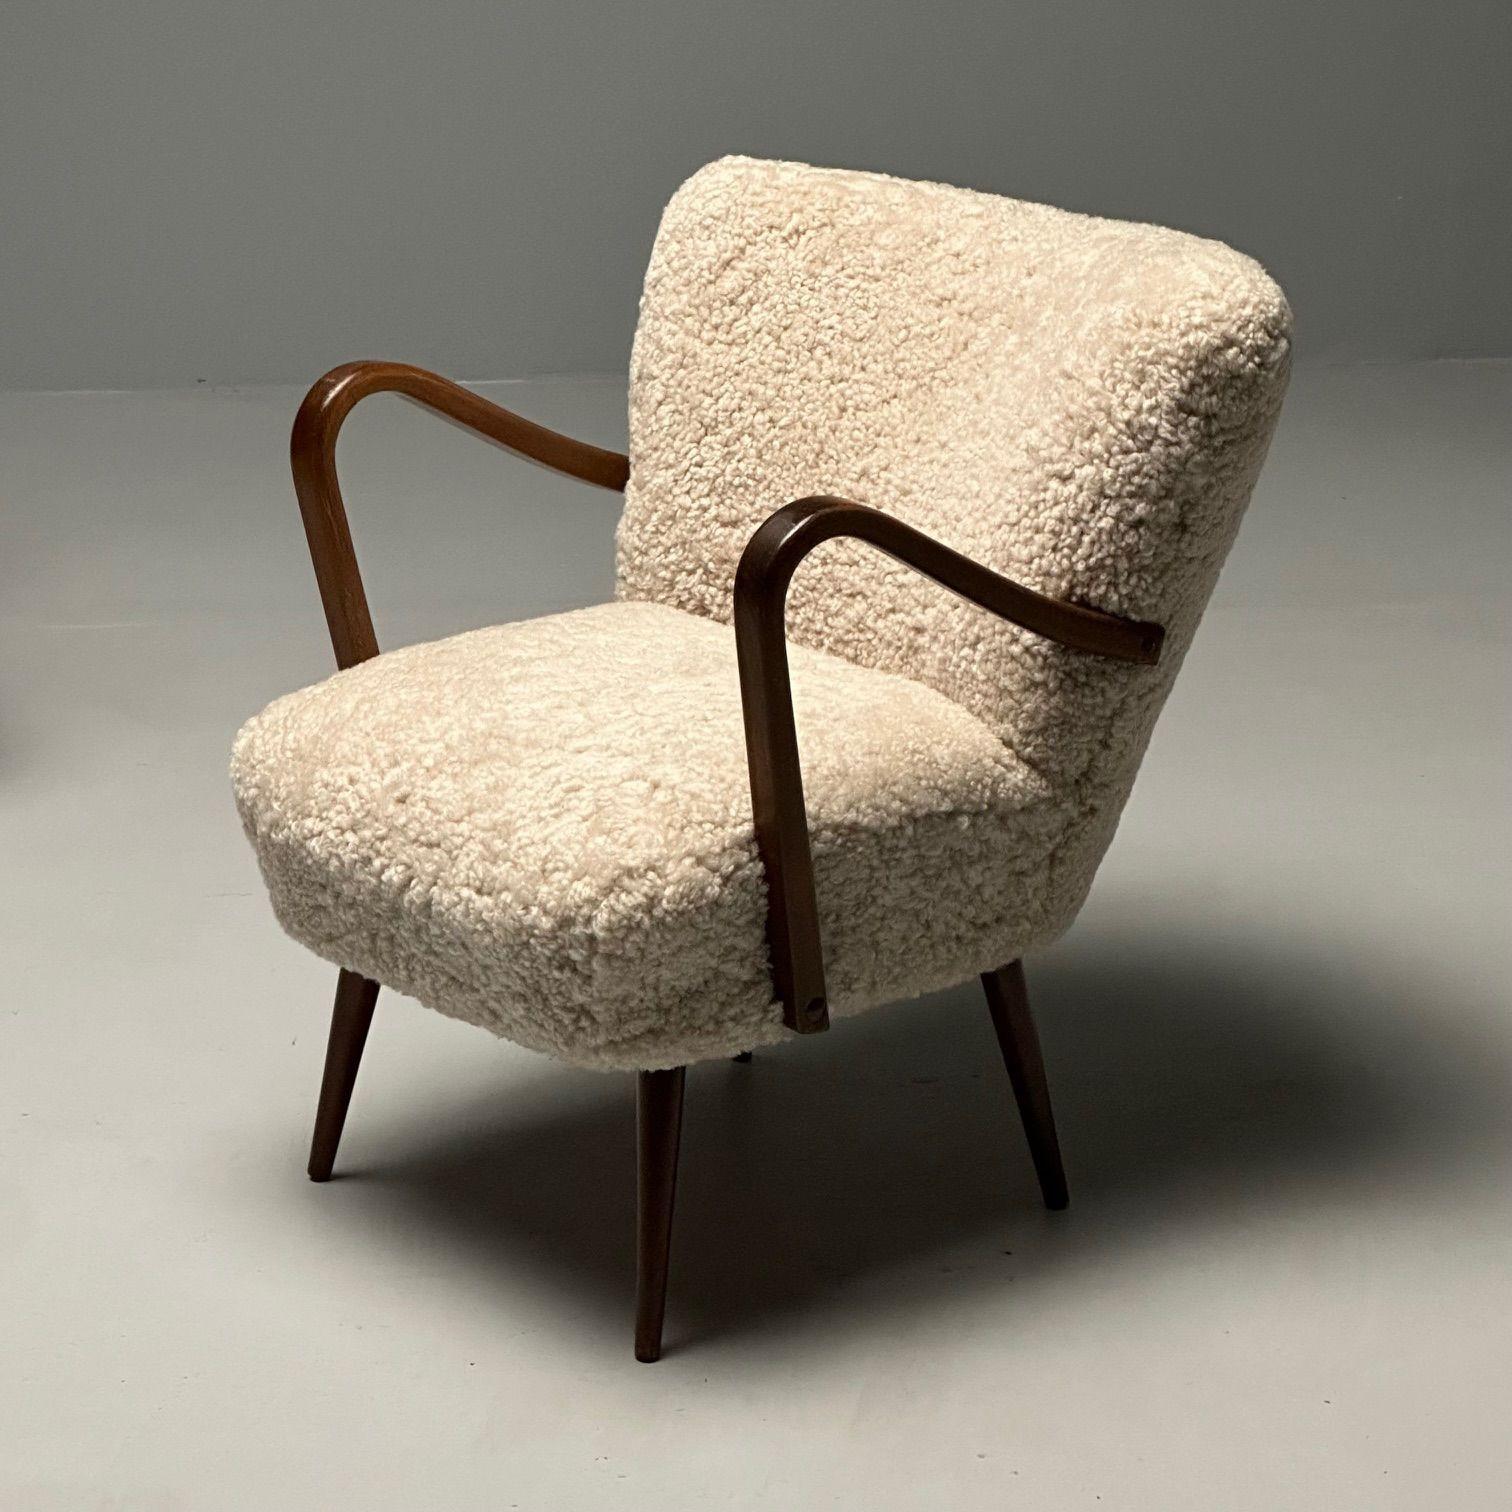 Swedish Mid-Century Modern, Shearling Chair, Sheepskin, Beech, 1950s

Chic modern arm, lounge, or occasional chair designed and produced in Sweden circa 1950s. This example has been newly upholstered in a luxurious 17 mm curly Australian sheepskin